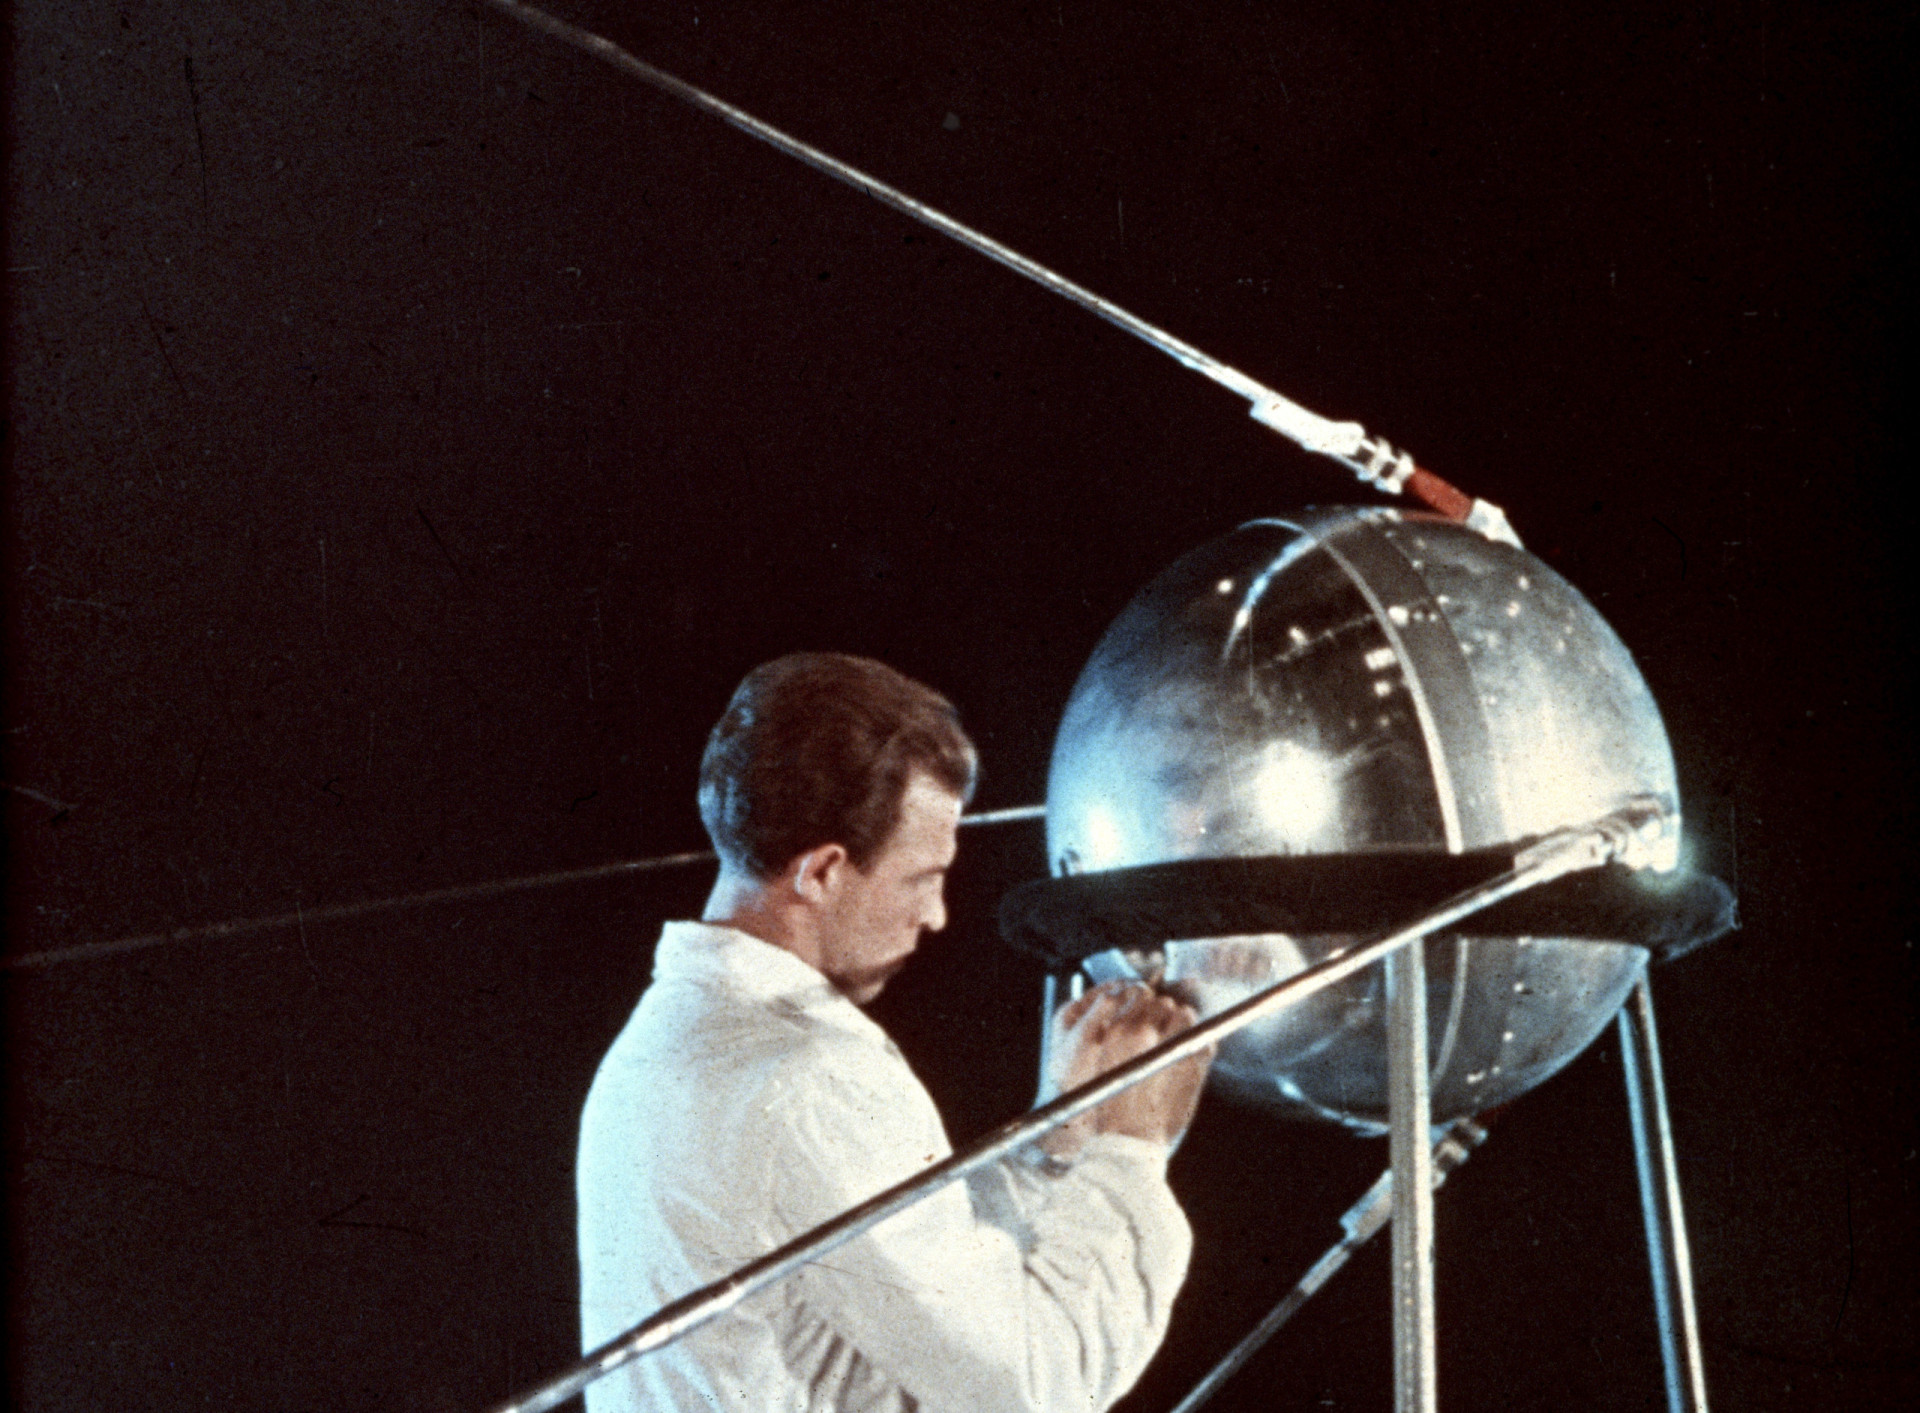 <p>Sputnik 1 was the first ever artificial Earth satellite in orbit. Launched by the Soviet Union in 1957, it made America nervous.</p><p>You may also like:<a href="https://www.starsinsider.com/n/459039?utm_source=msn.com&utm_medium=display&utm_campaign=referral_description&utm_content=713901en-en"> The most iconic tattoos in sports history</a></p>